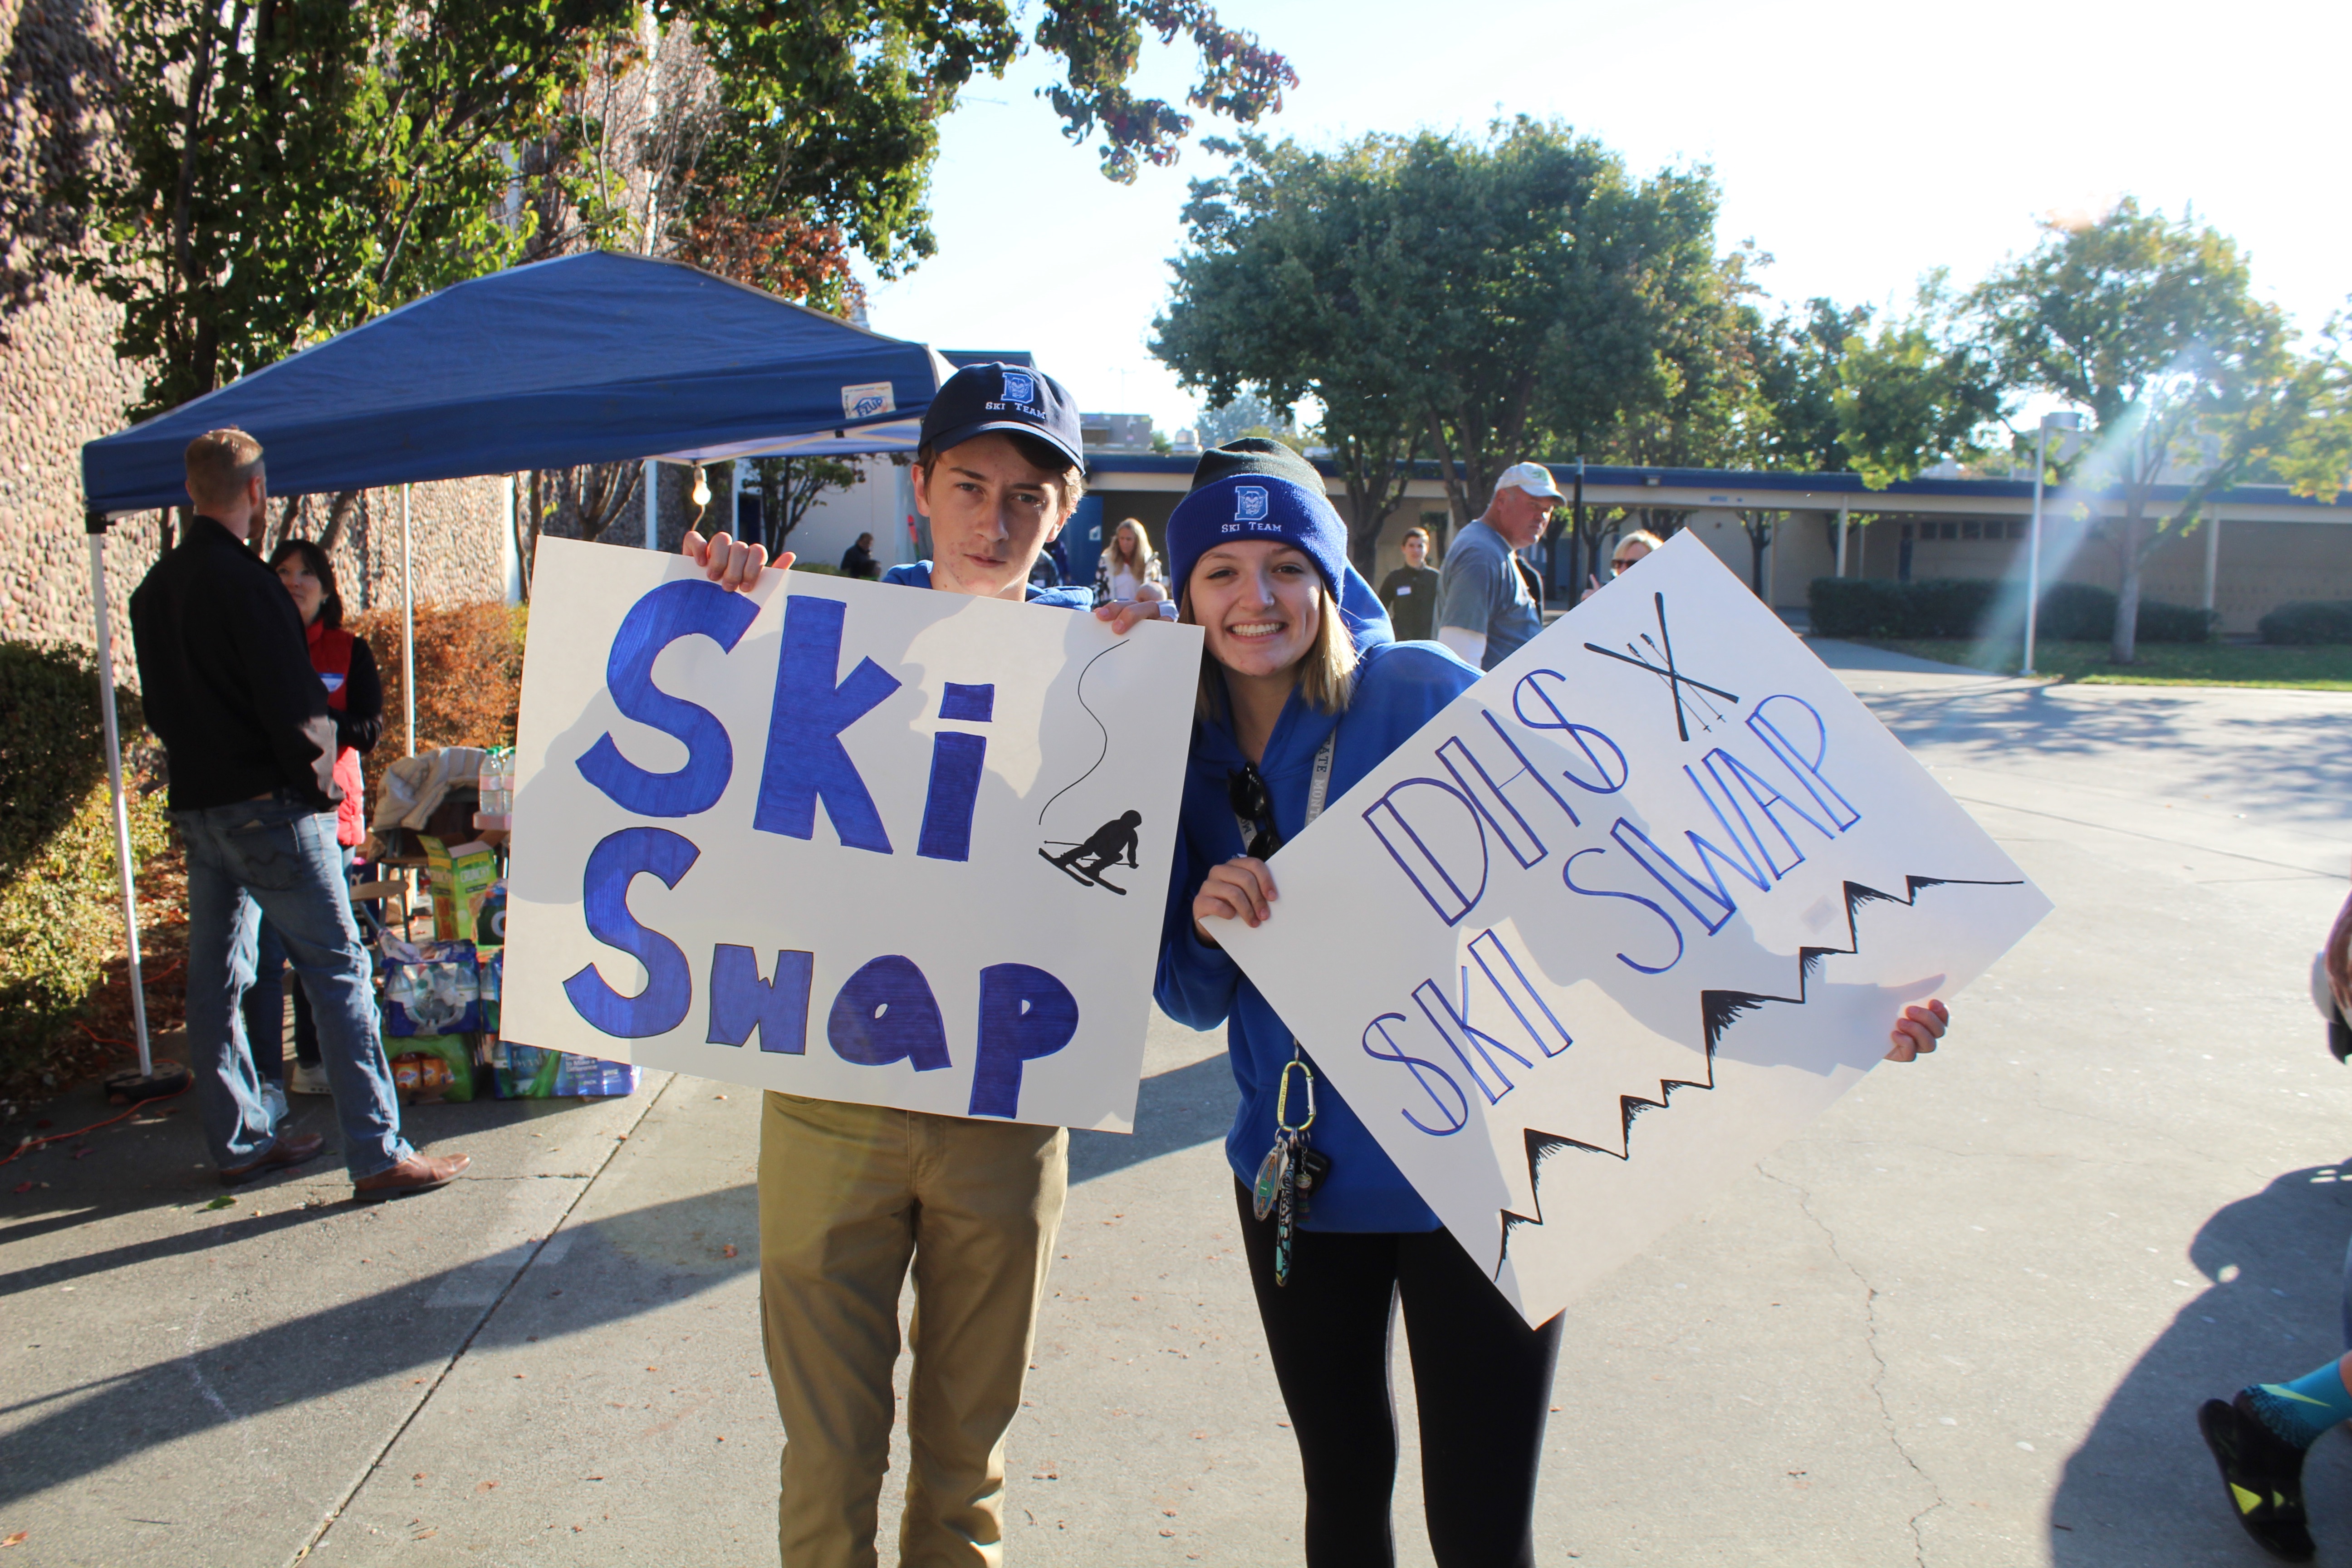 Members of the Davis High ski and snowboard team prepare for the Ski Swap to help raise money for their team.